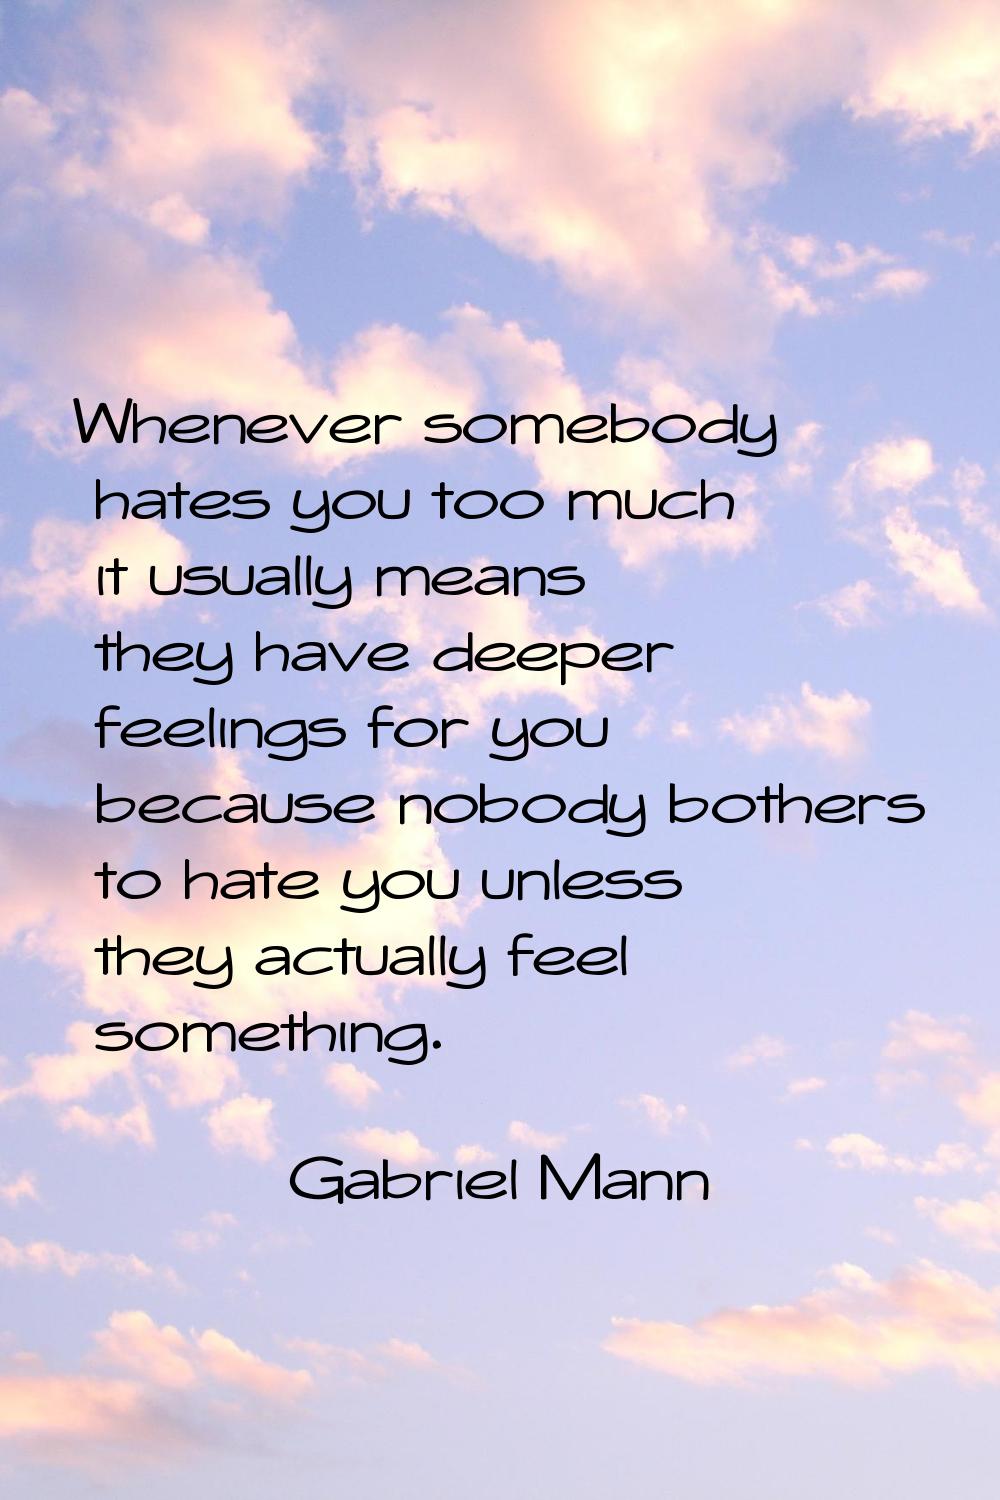 Whenever somebody hates you too much it usually means they have deeper feelings for you because nob